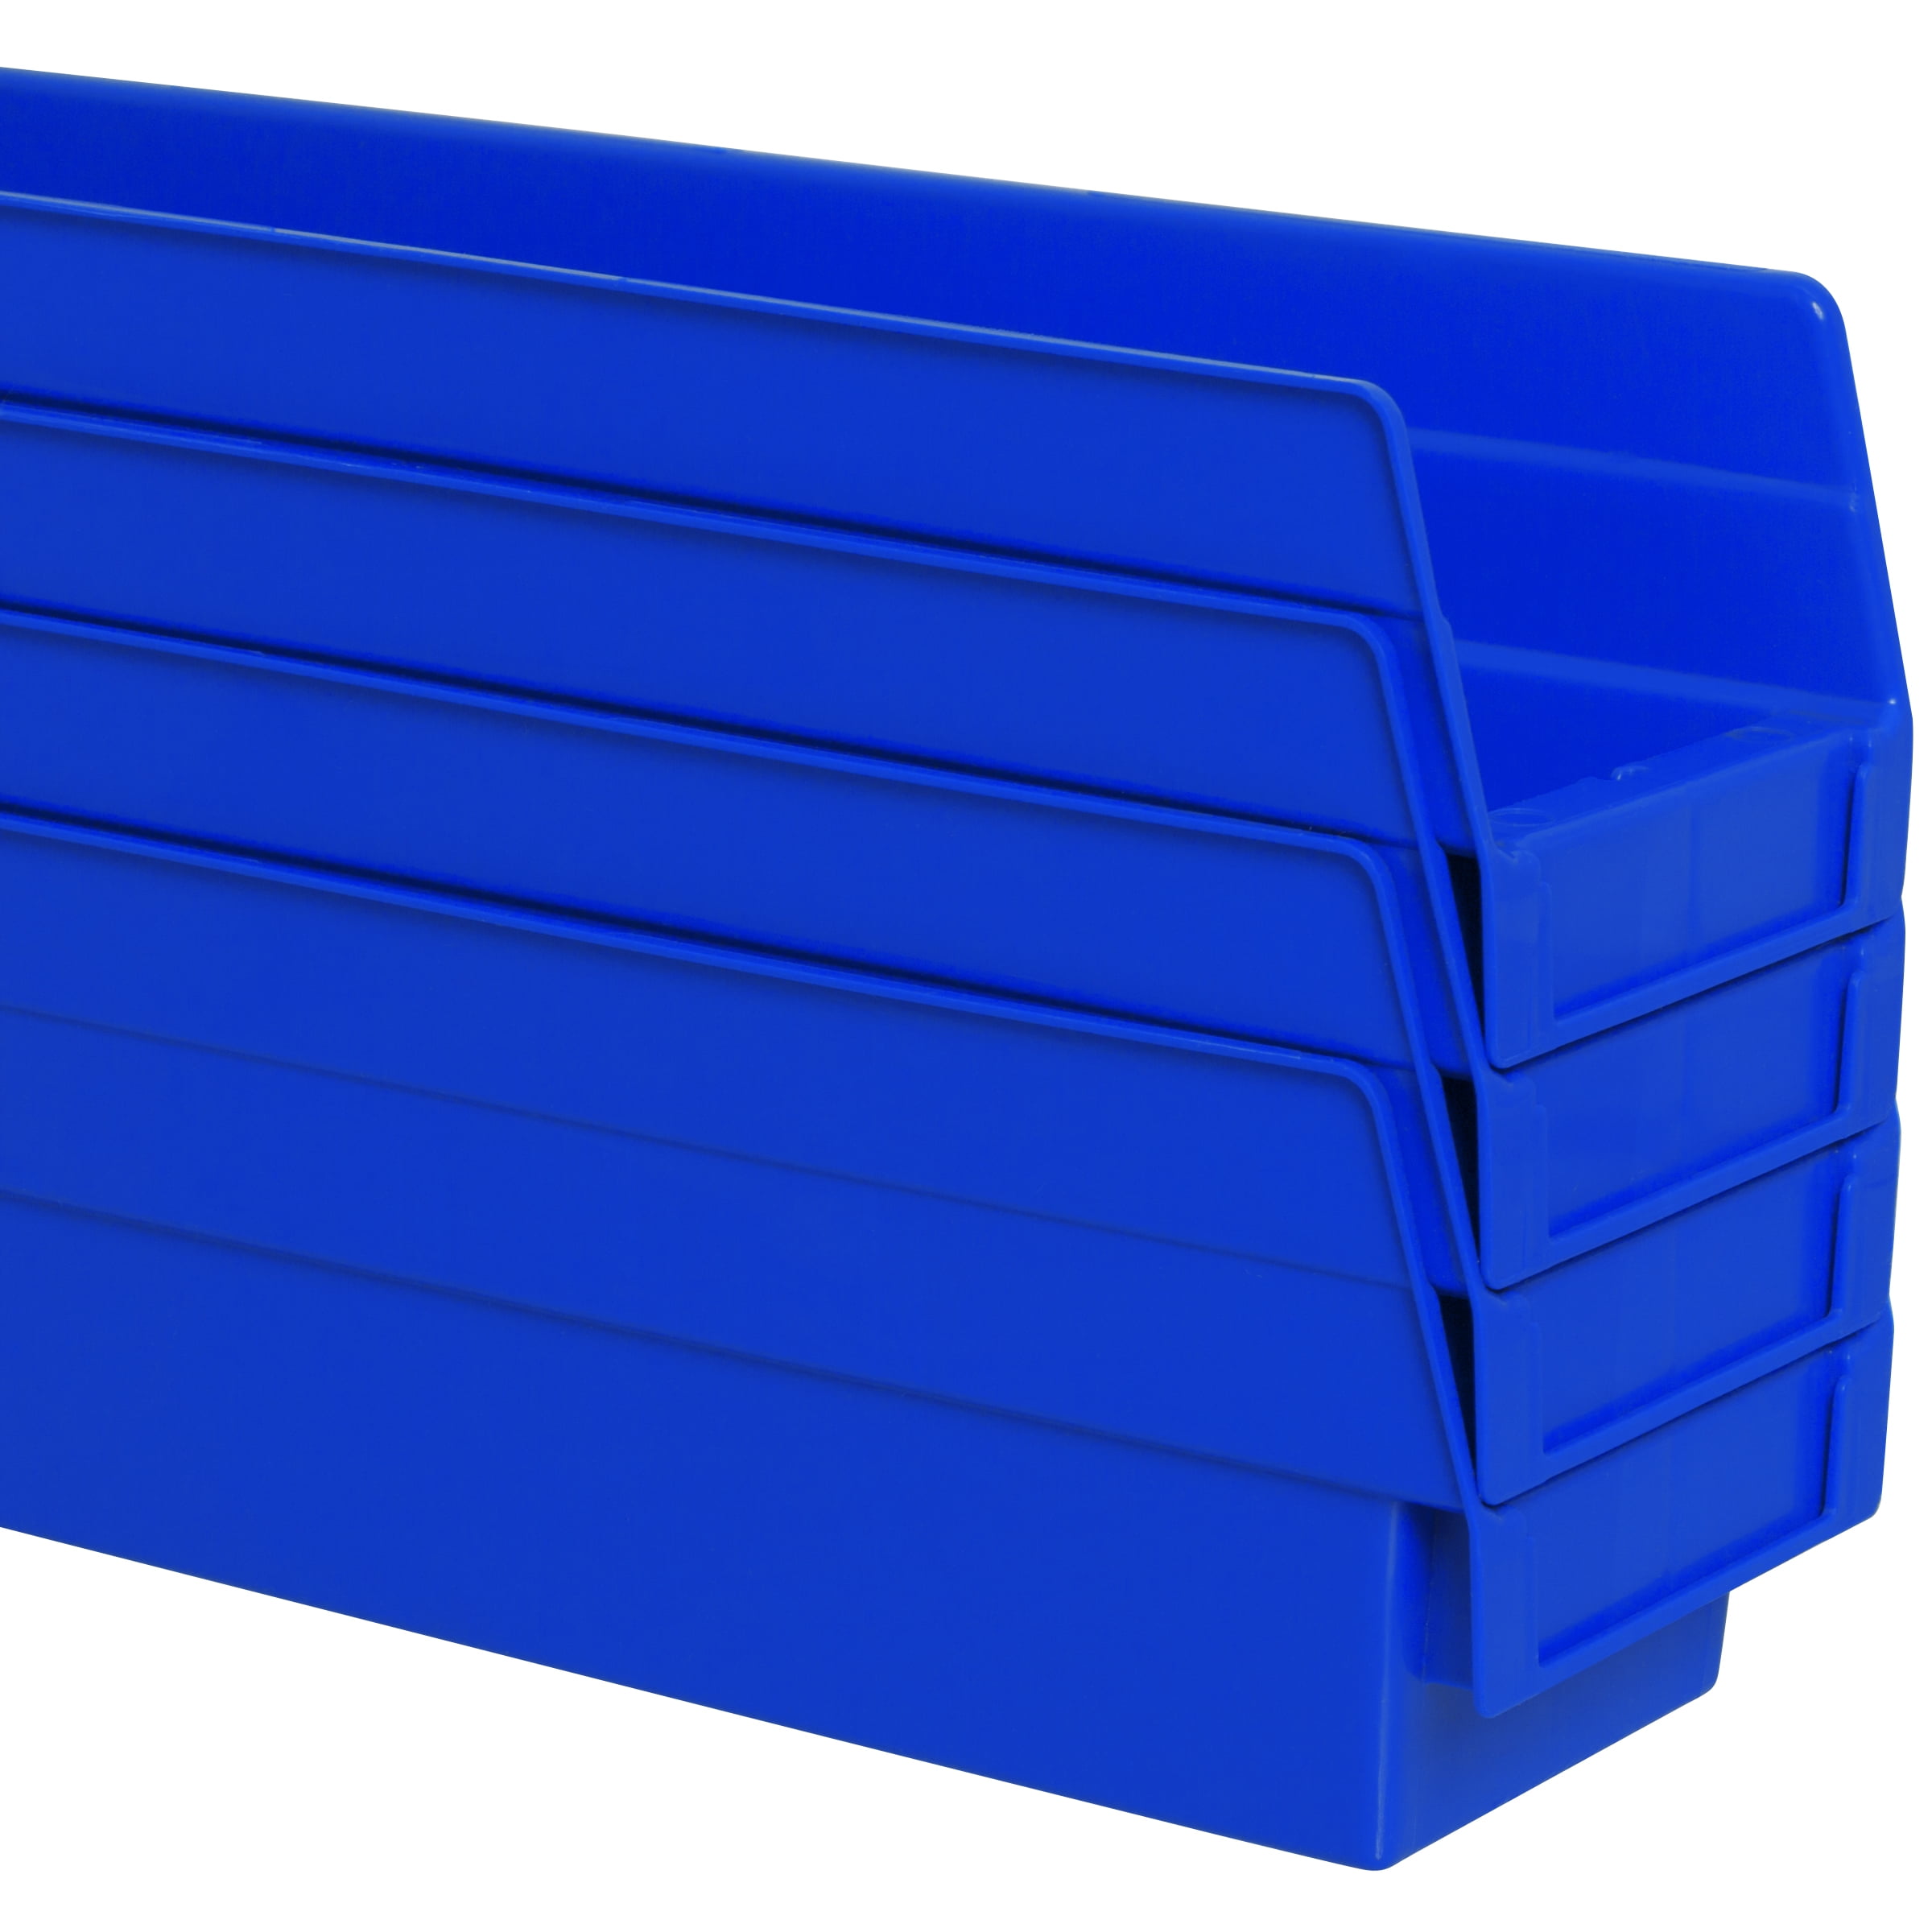  Akro-Mils 30130 Plastic Organizer and Storage Bins for  Refrigerator, Kitchen, Cabinet, or Pantry Organization, 12-Inch x 6-Inch x  4-Inch, Blue, 12-Pack : Everything Else